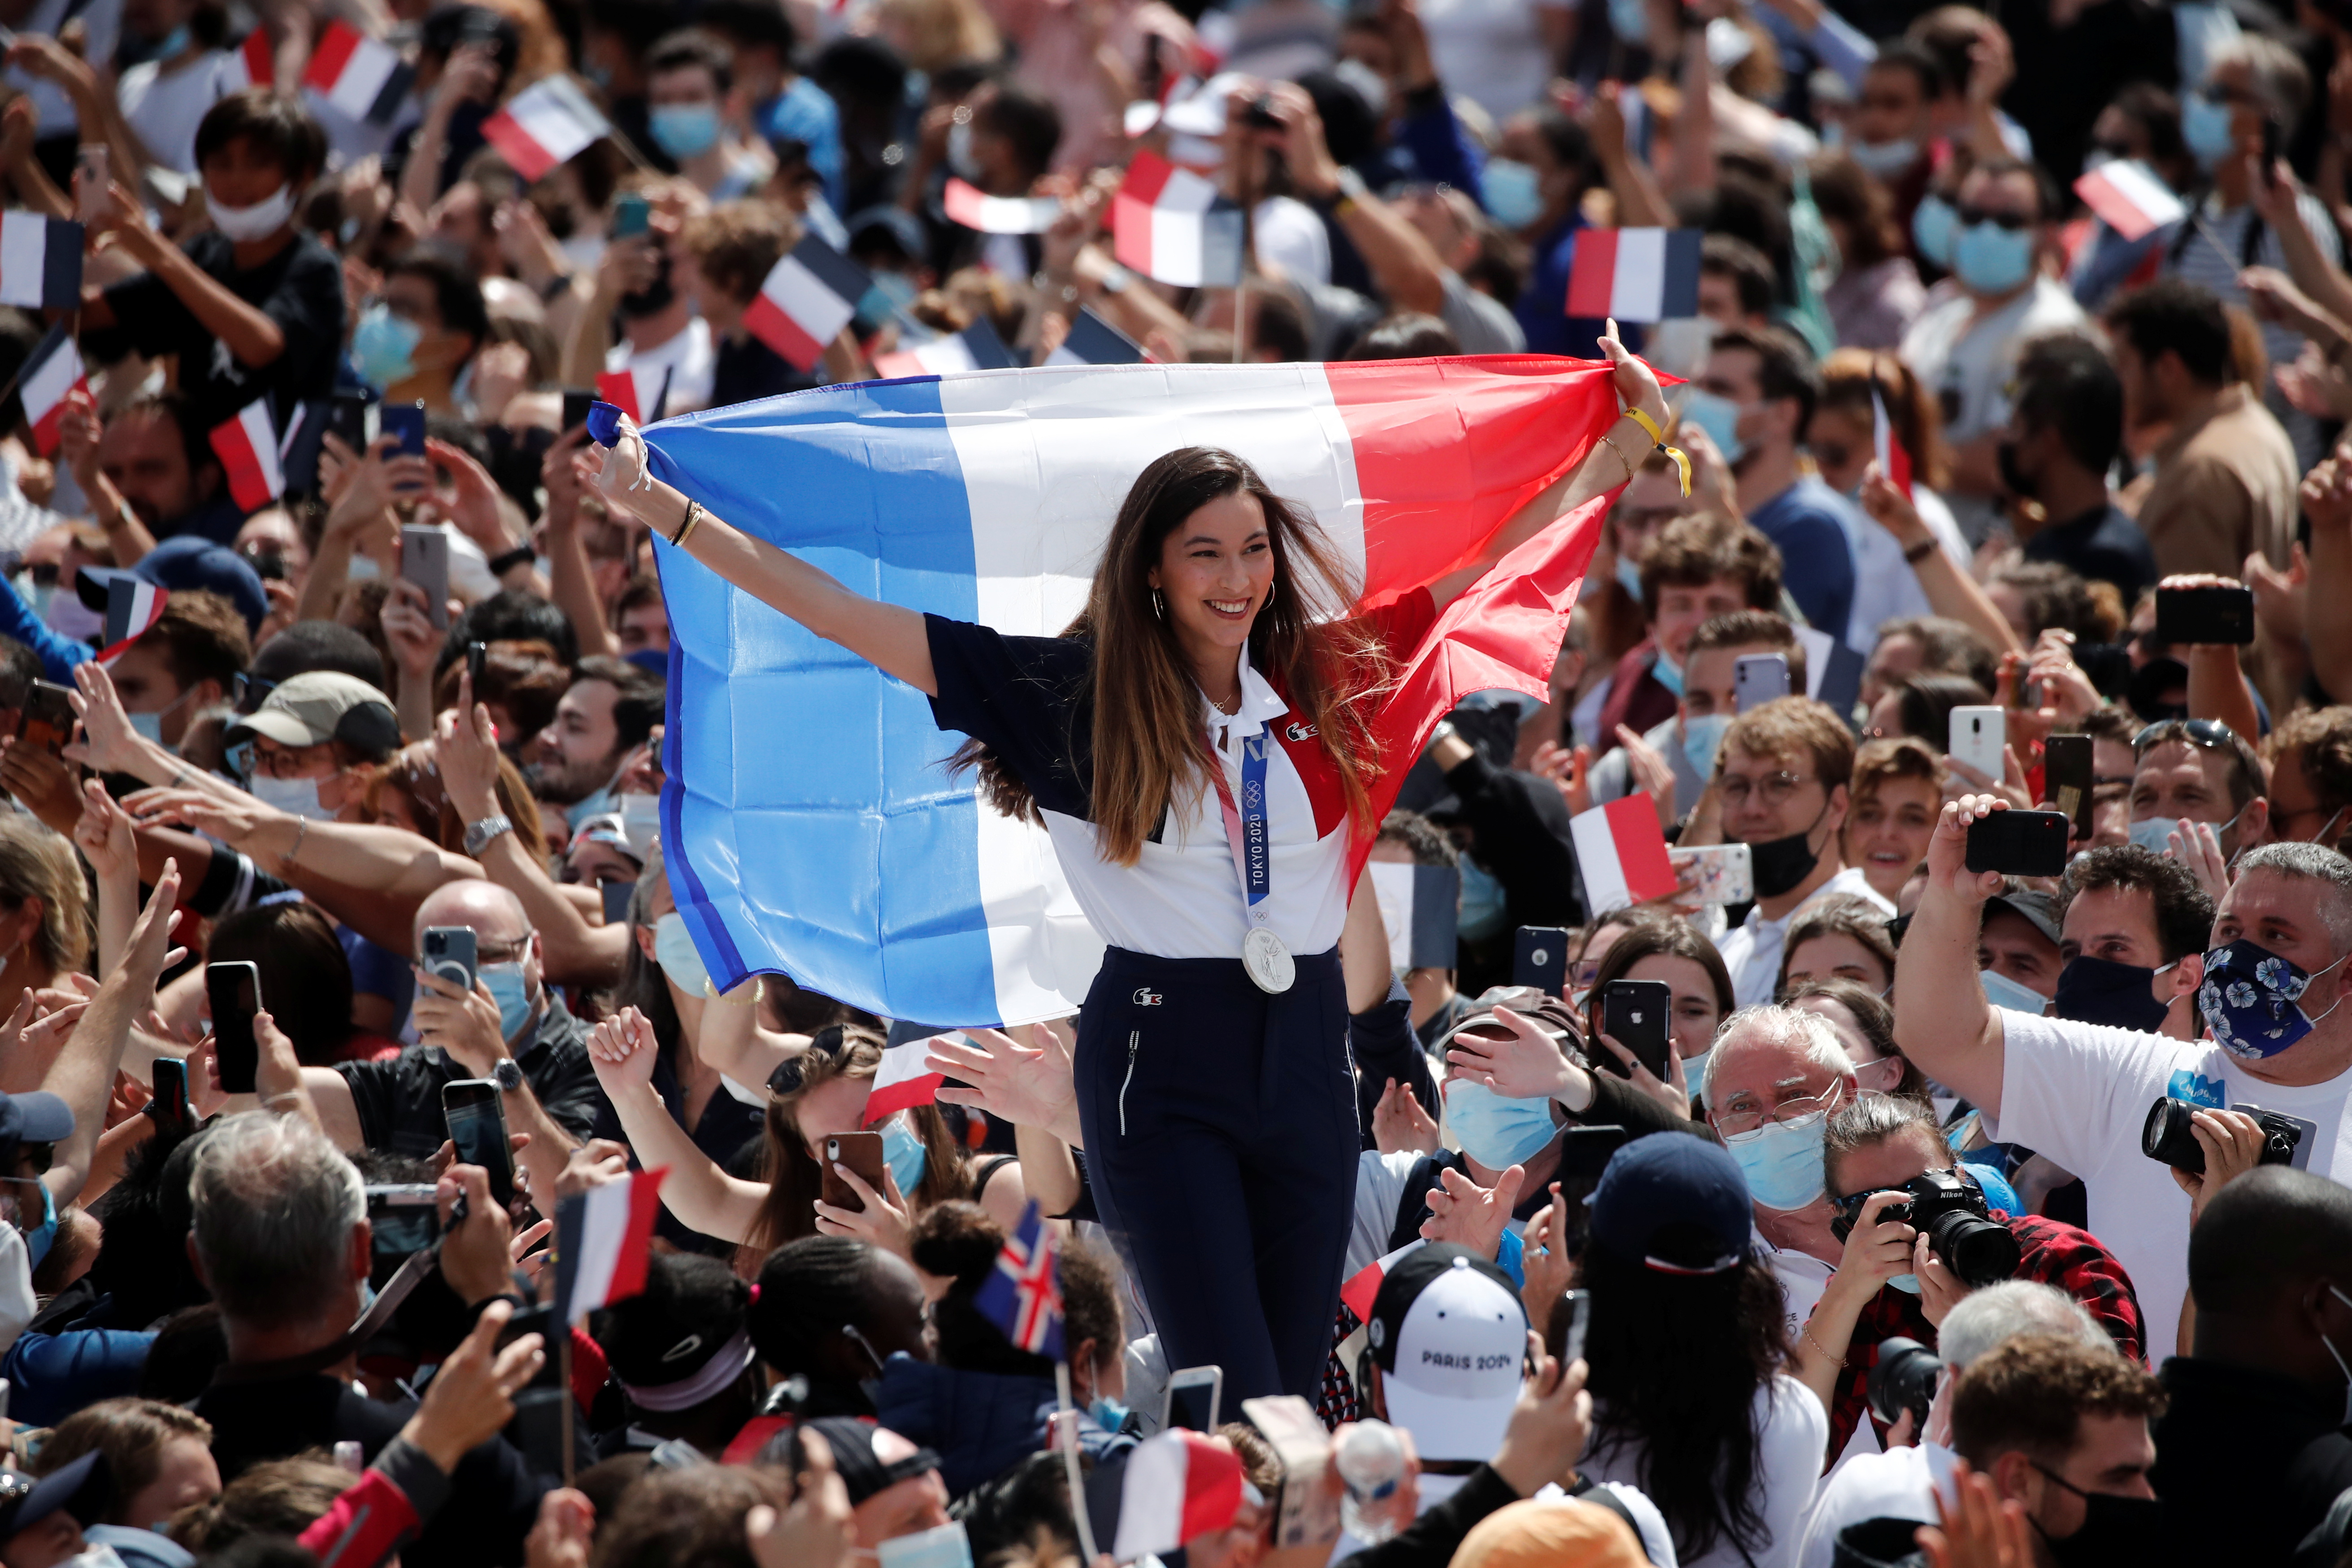 Silver medalist Charlotte Lembach of France holds a French flag as she arrives at Paris' Olympics fan zone to watch the closing ceremony of the Tokyo 2020 games at Trocadero Gardens in Paris, France, August 8, 2021. REUTERS/Benoit Tessier